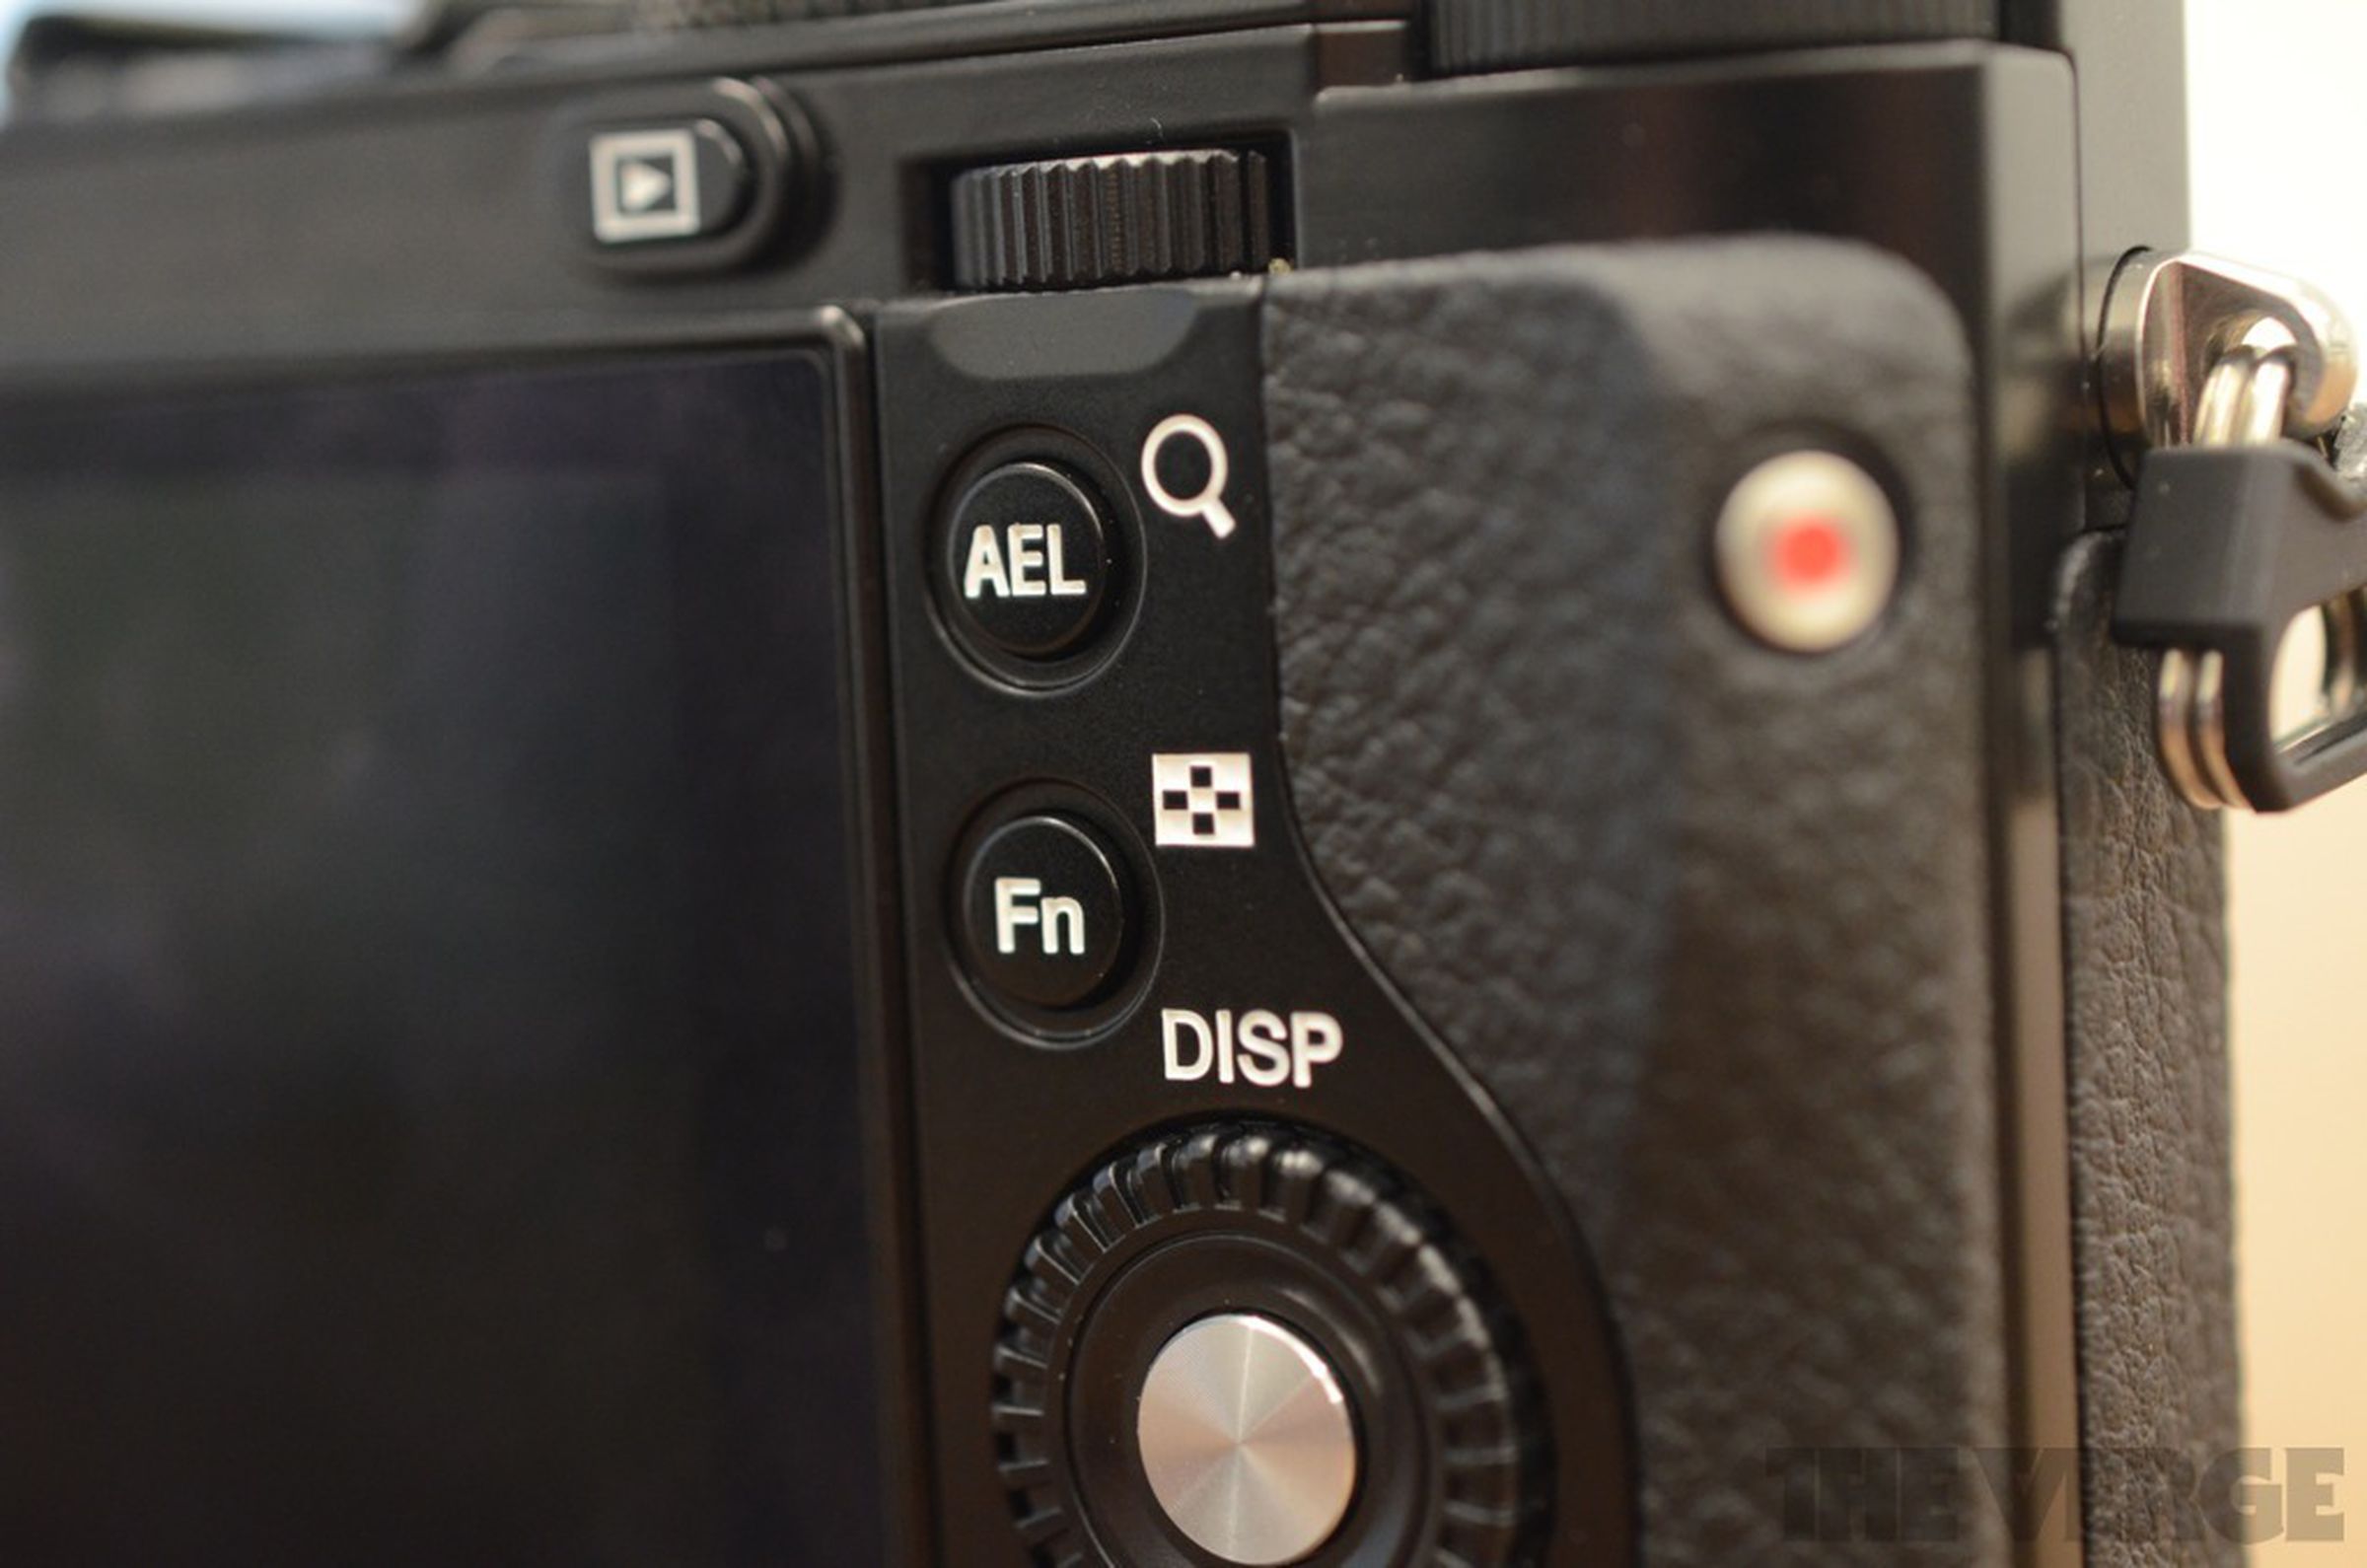 Sony Cyber-shot RX1 hands-on pictures